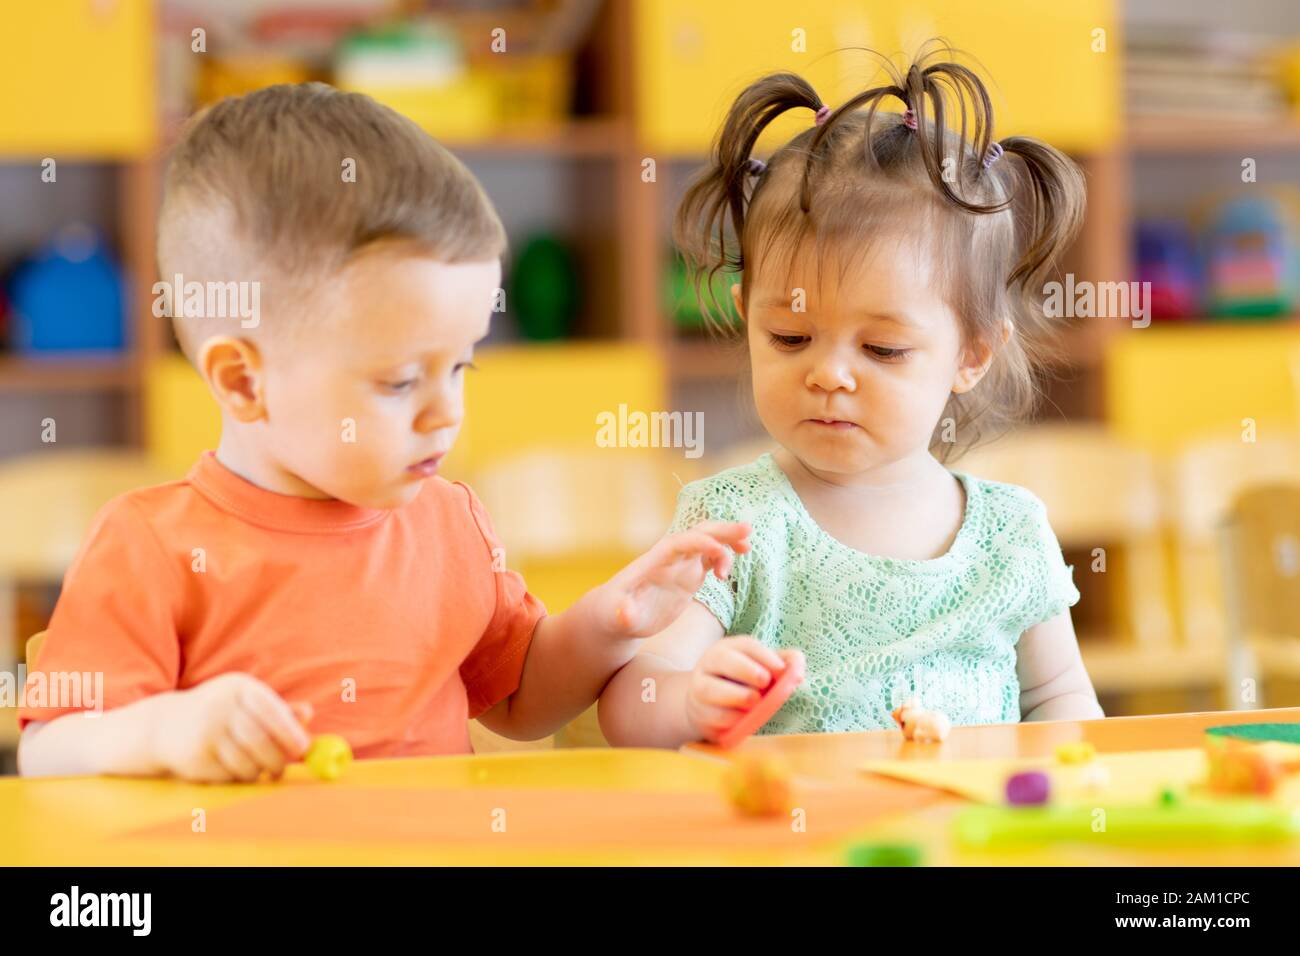 Toddlers boy and girl playing at table with educational toys. Children infants in creche or daycare. Stock Photo